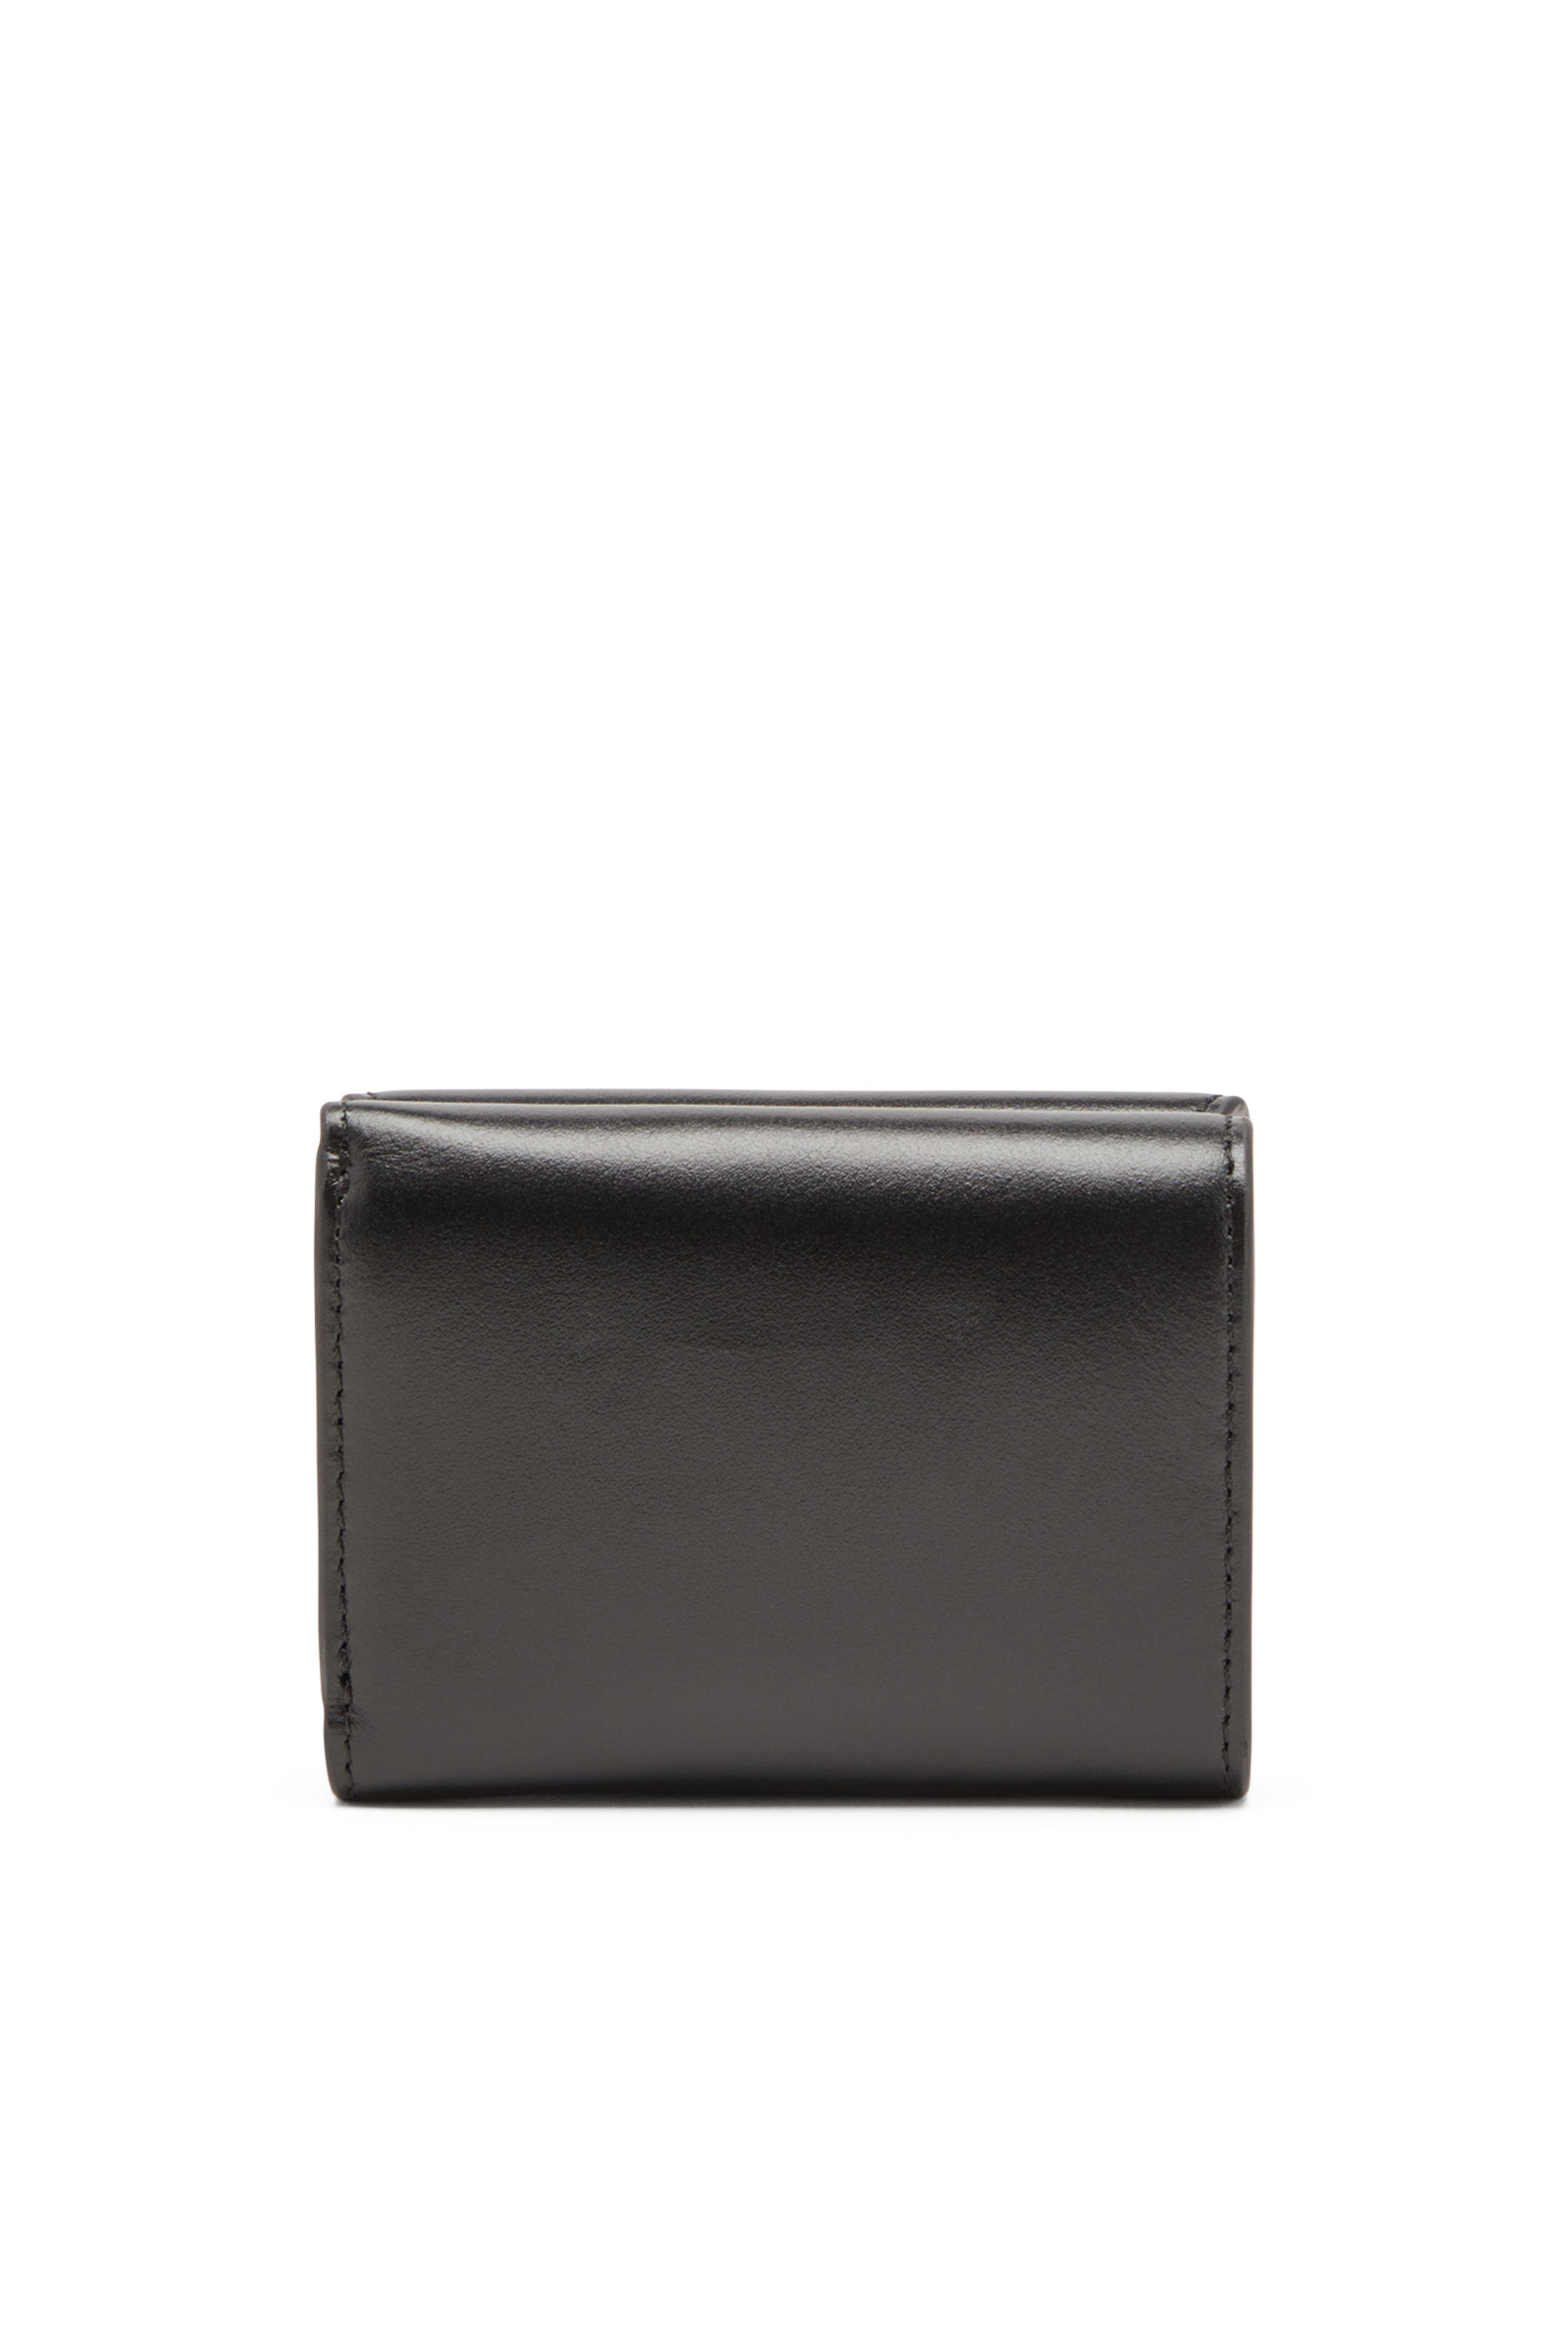 Diesel - 1DR TRI FOLD COIN XS II, Female Tri-fold wallet in leather in ブラック - Image 2